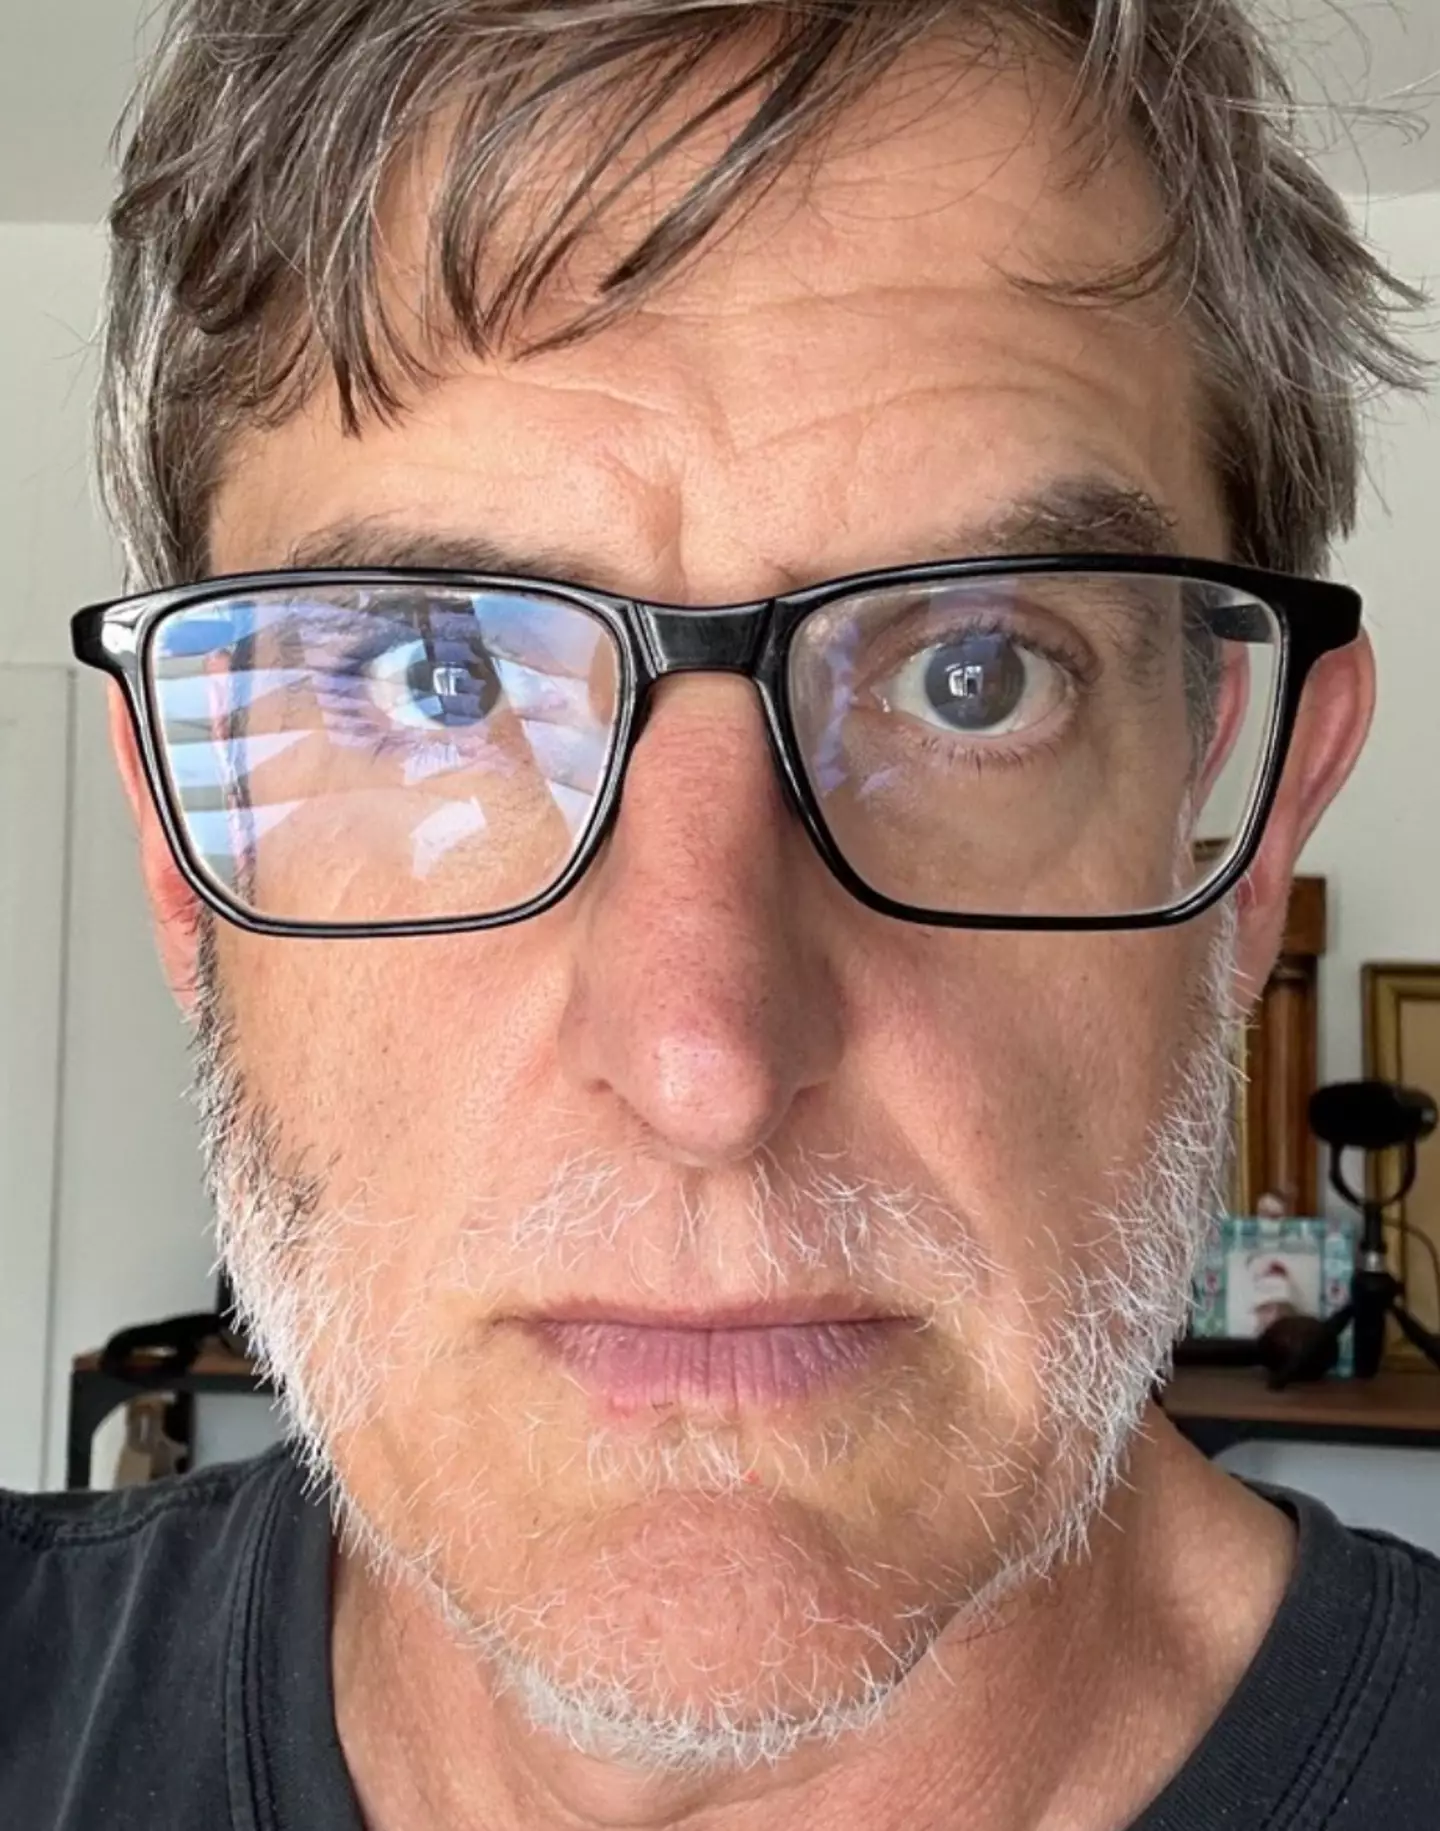 Louis Theroux has given regular updates about his alopecia.